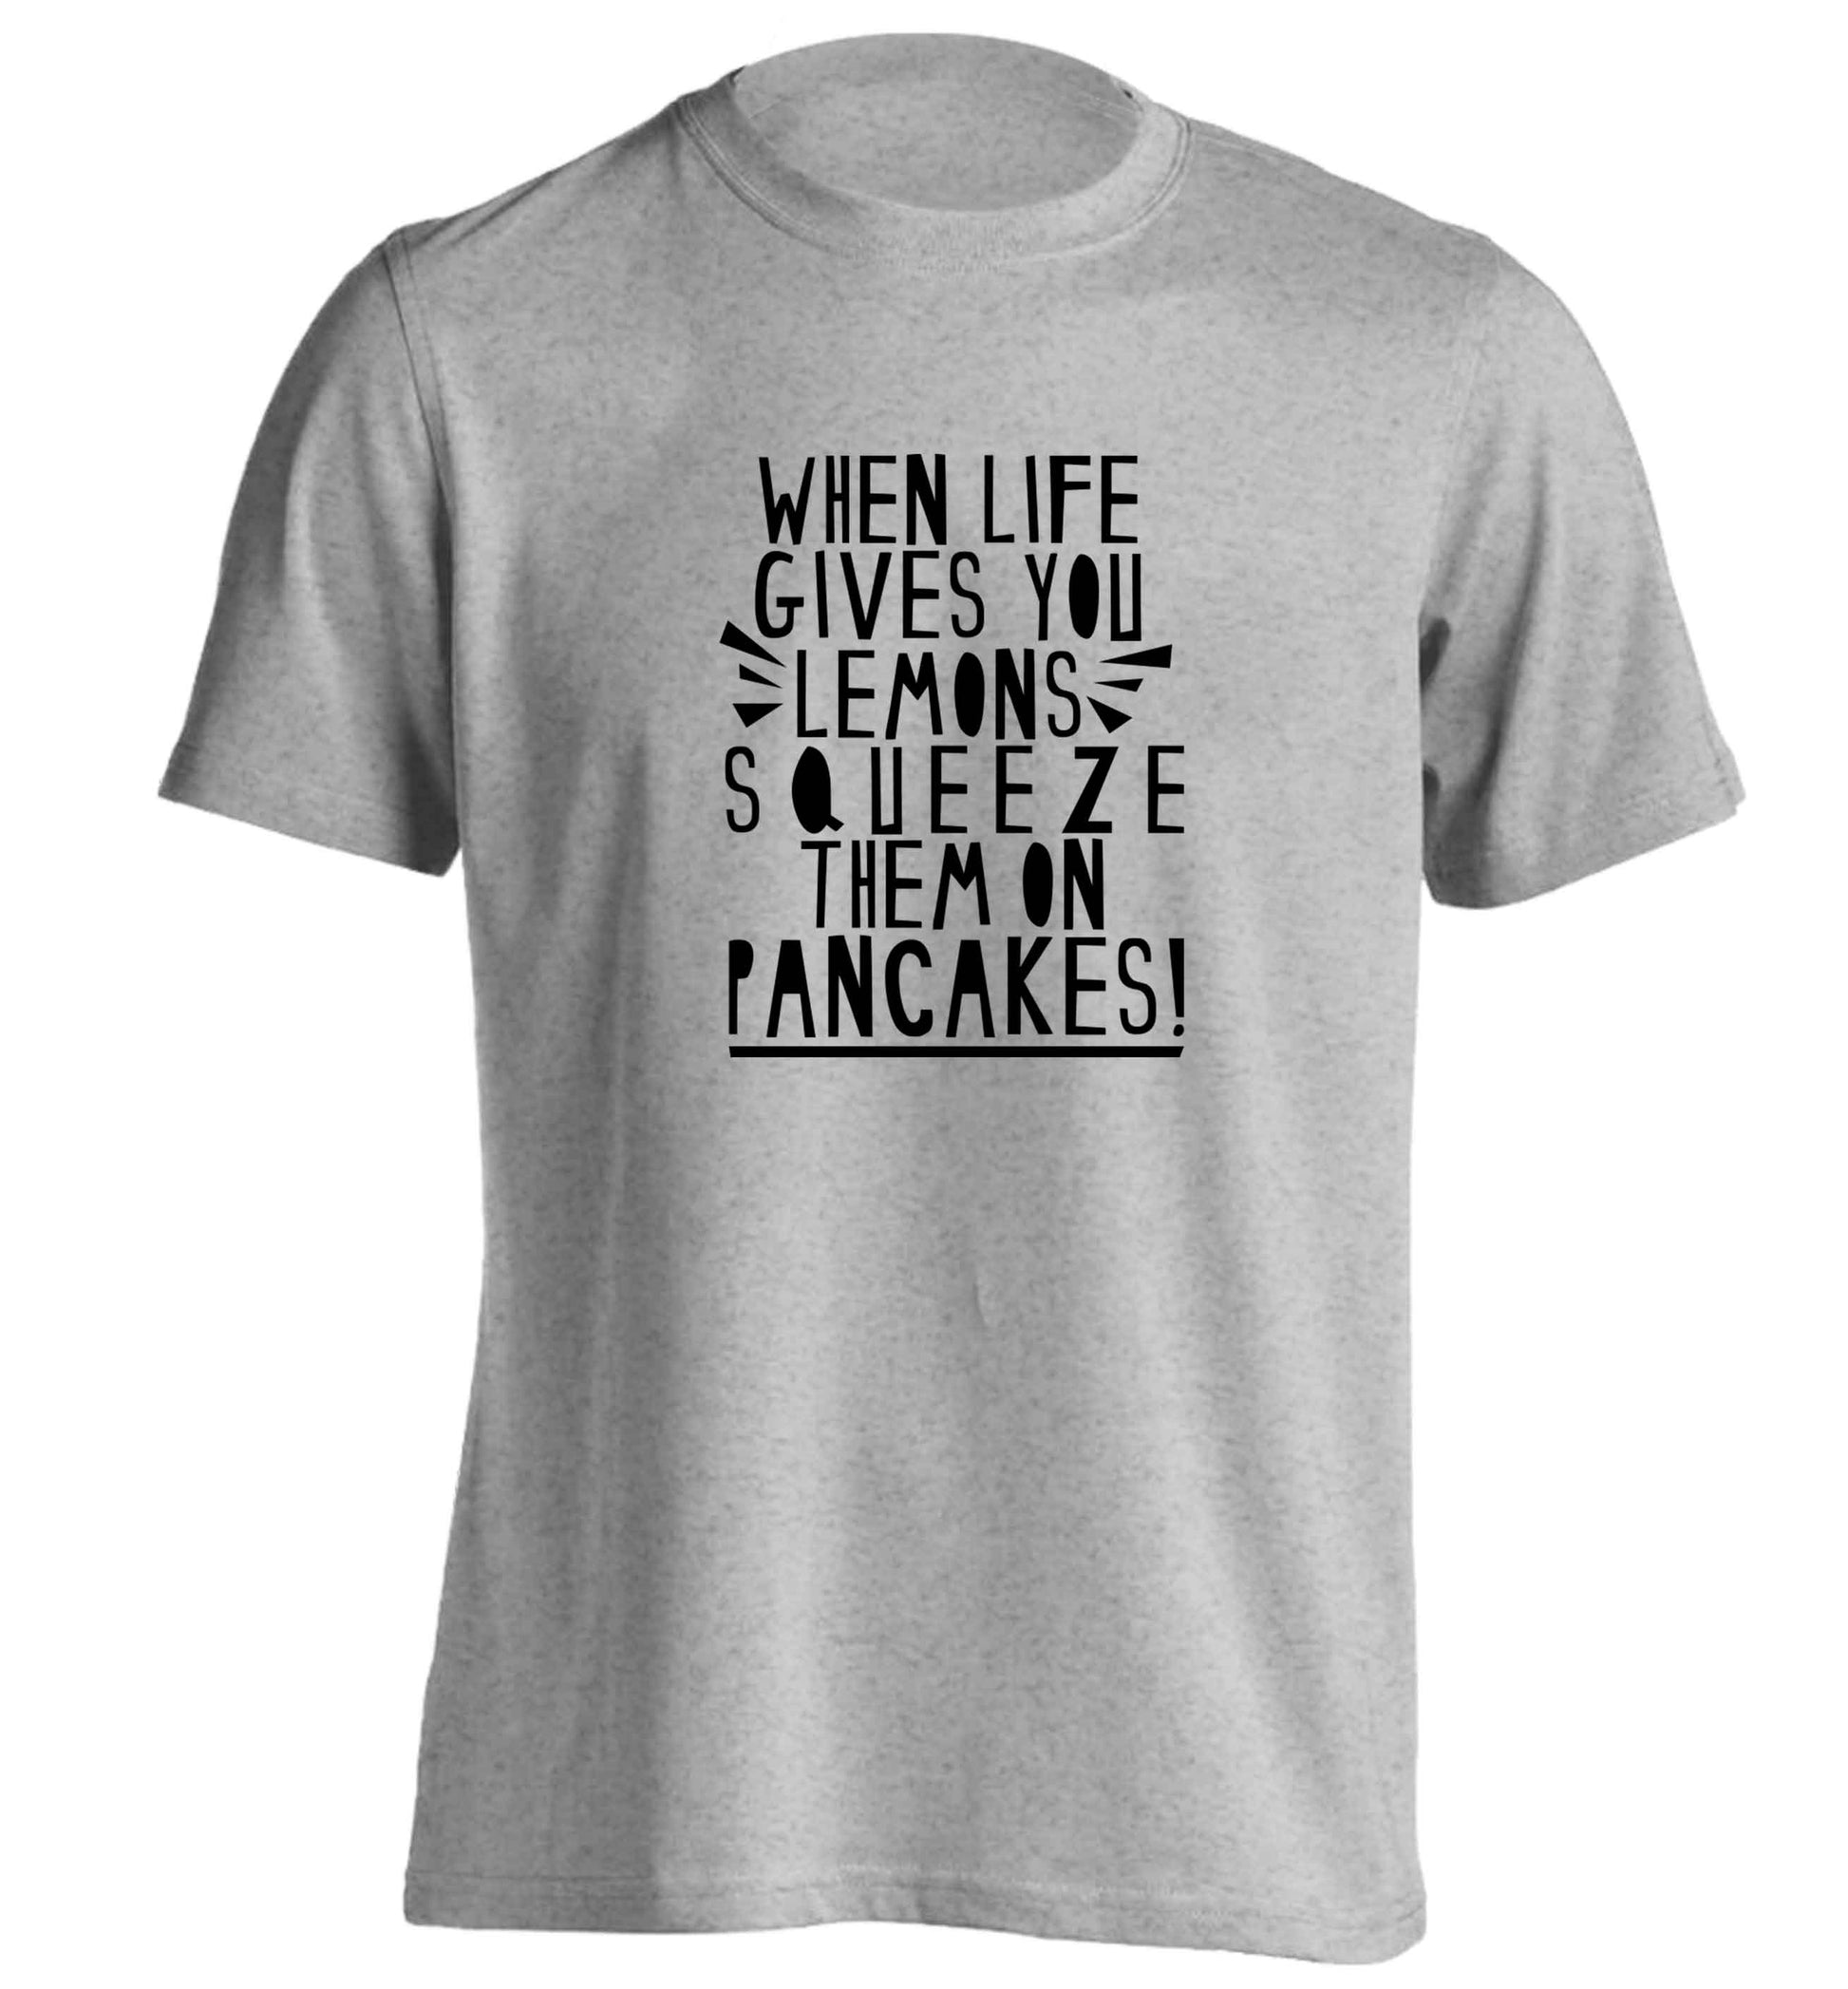 When life gives you lemons squeeze them on pancakes! adults unisex grey Tshirt 2XL